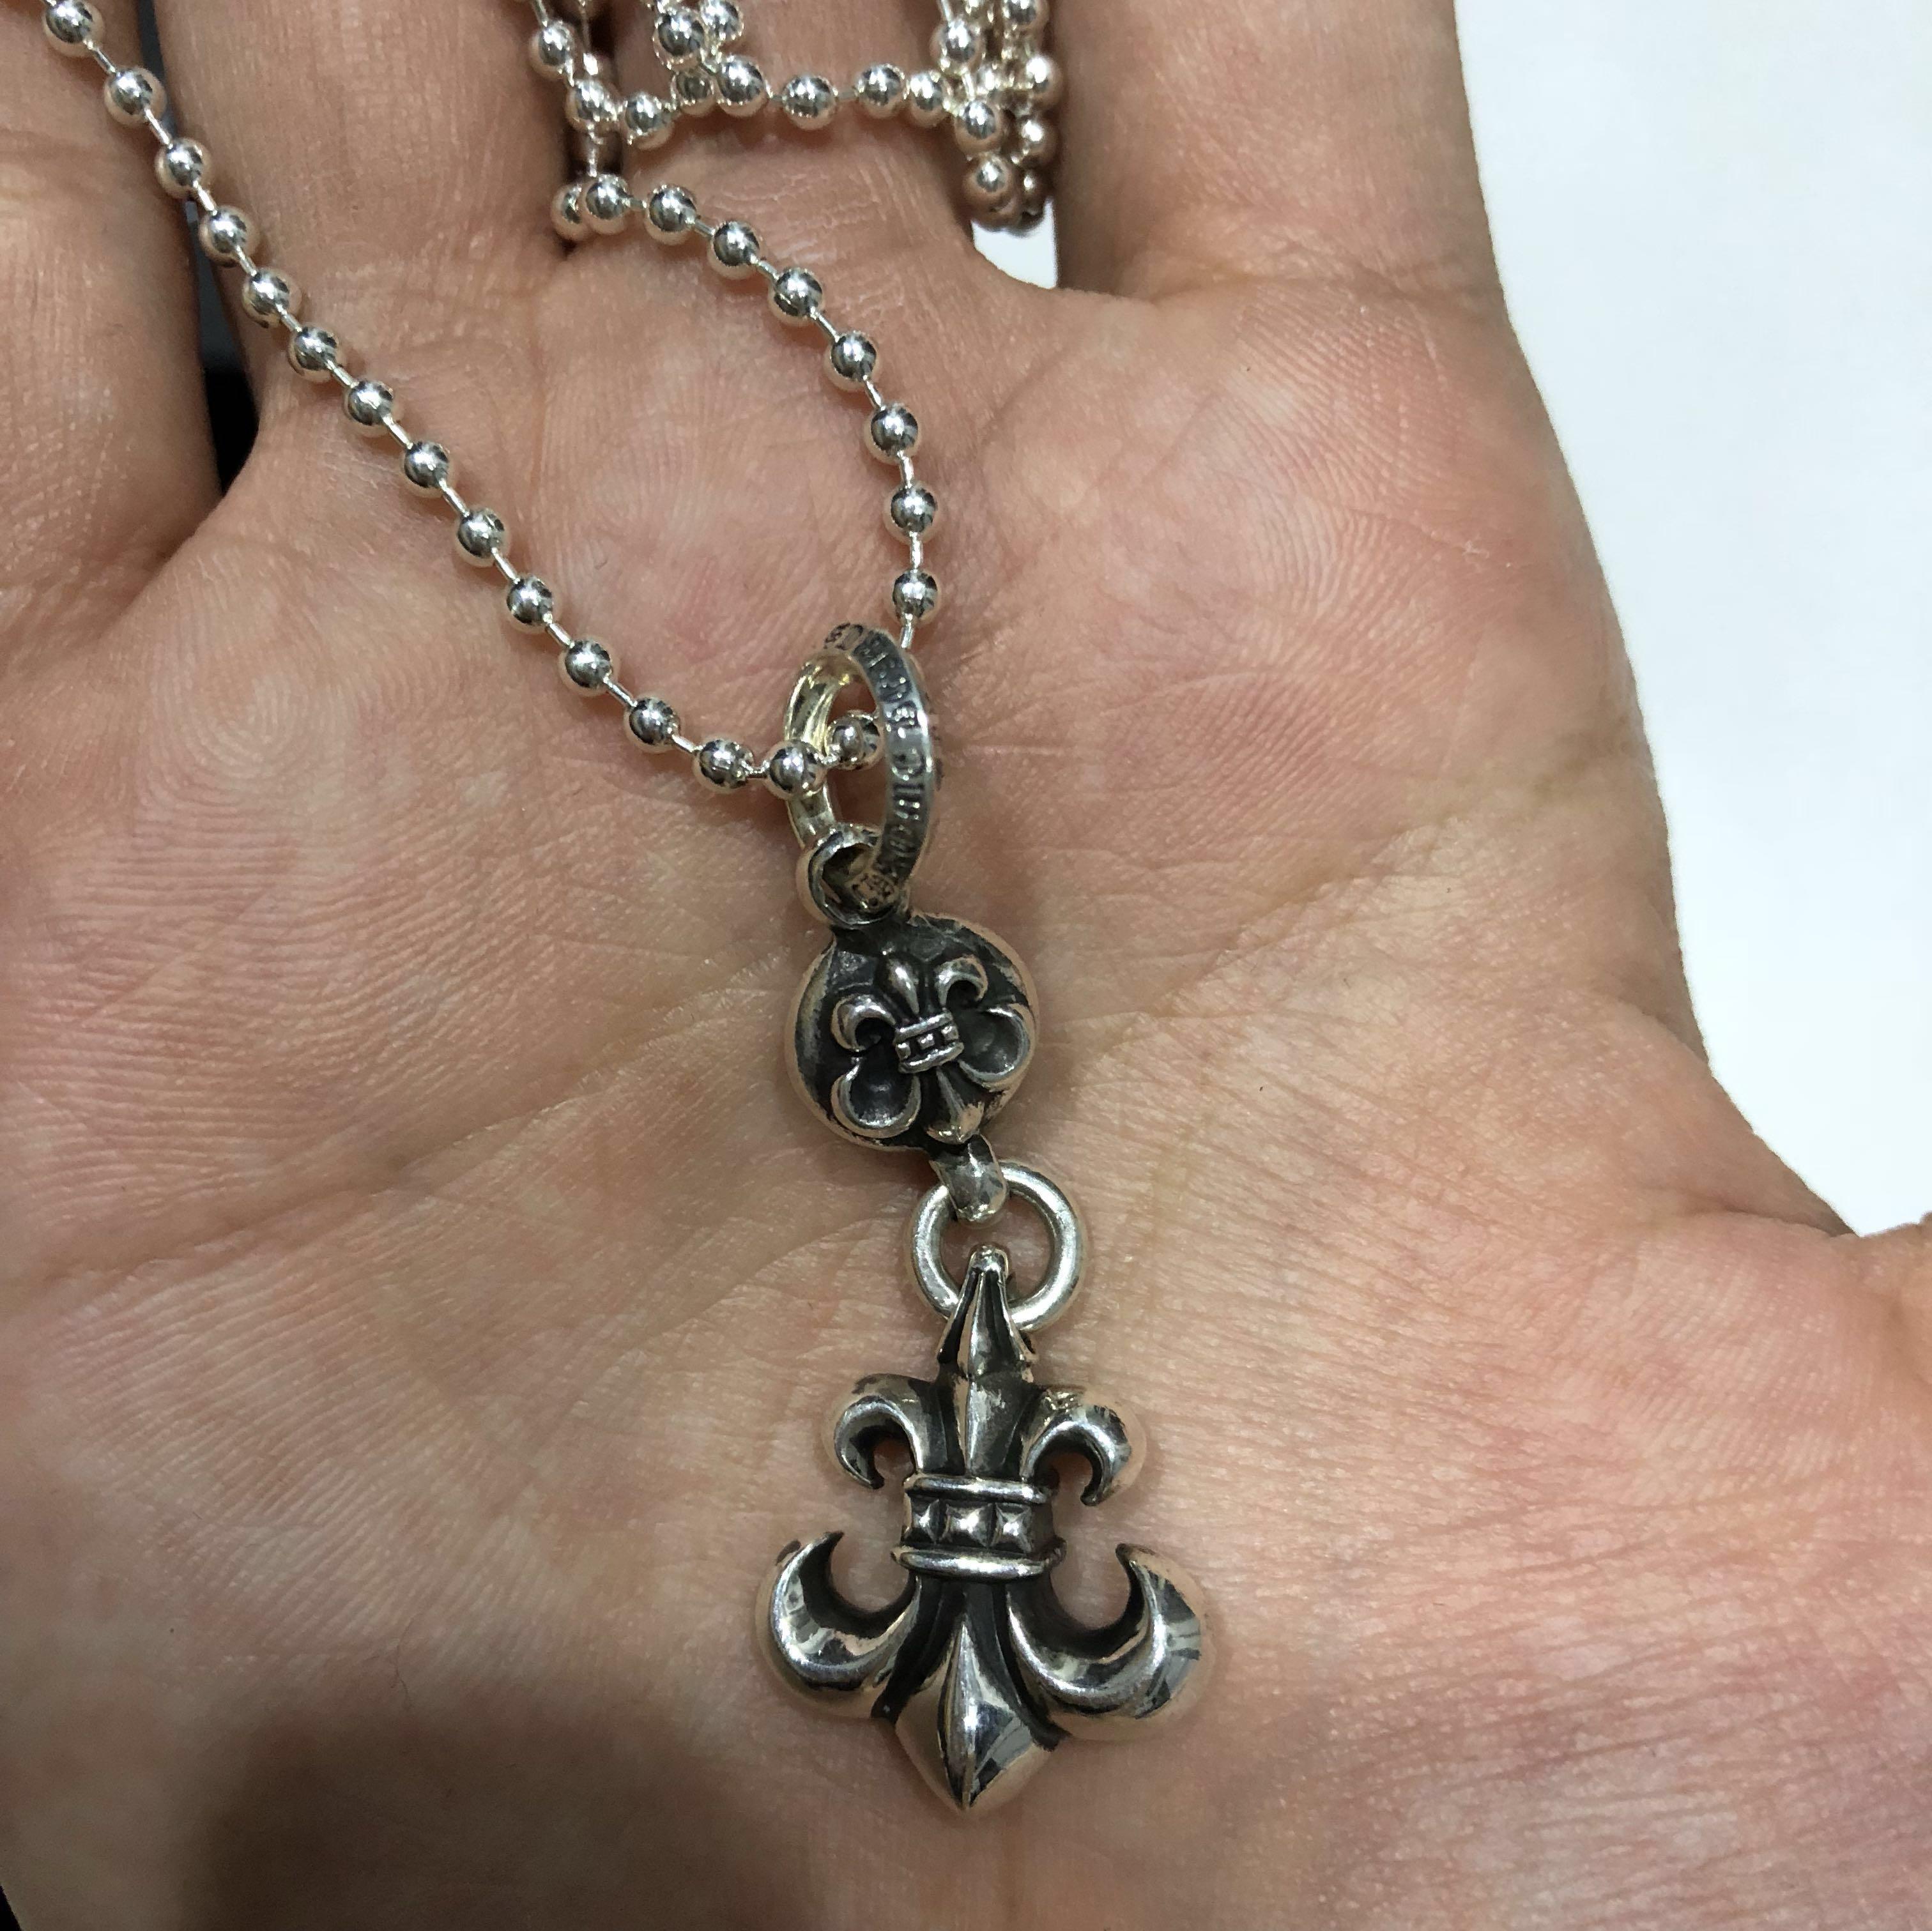 Chrome Hearts Ball Chain Necklace